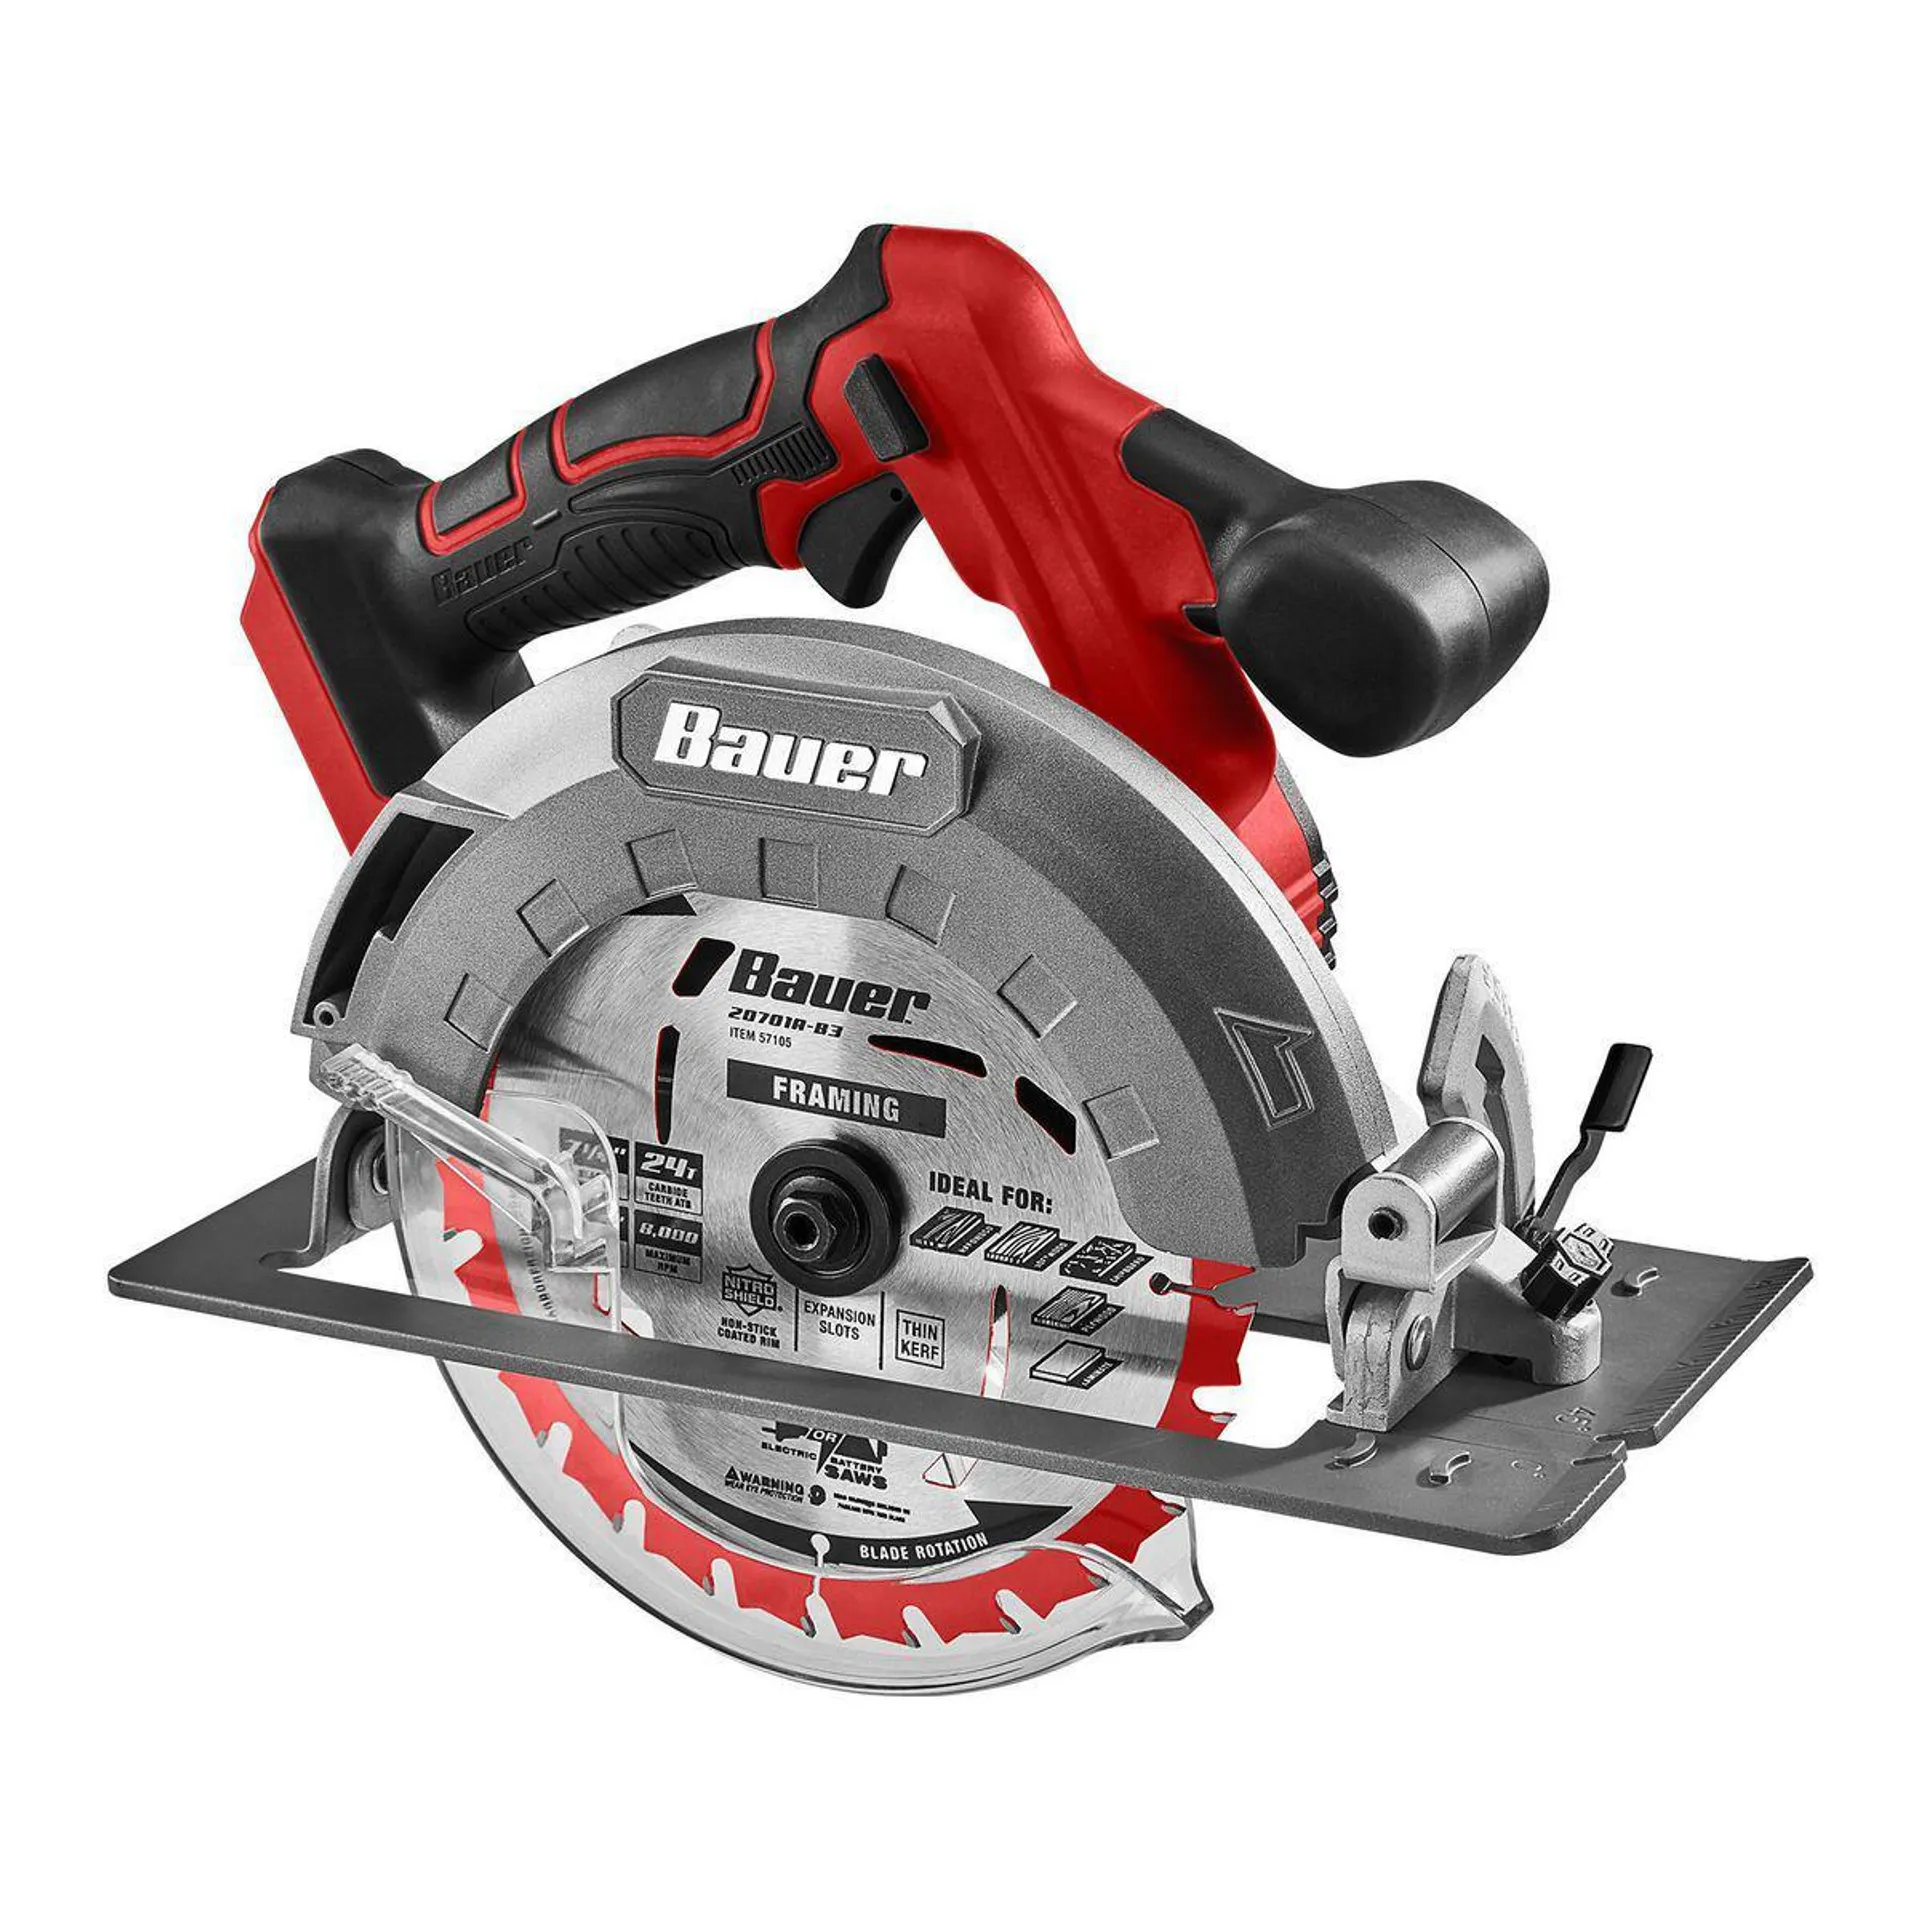 20V Brushless Cordless 7-1/4 in. Circular Saw - Tool Only